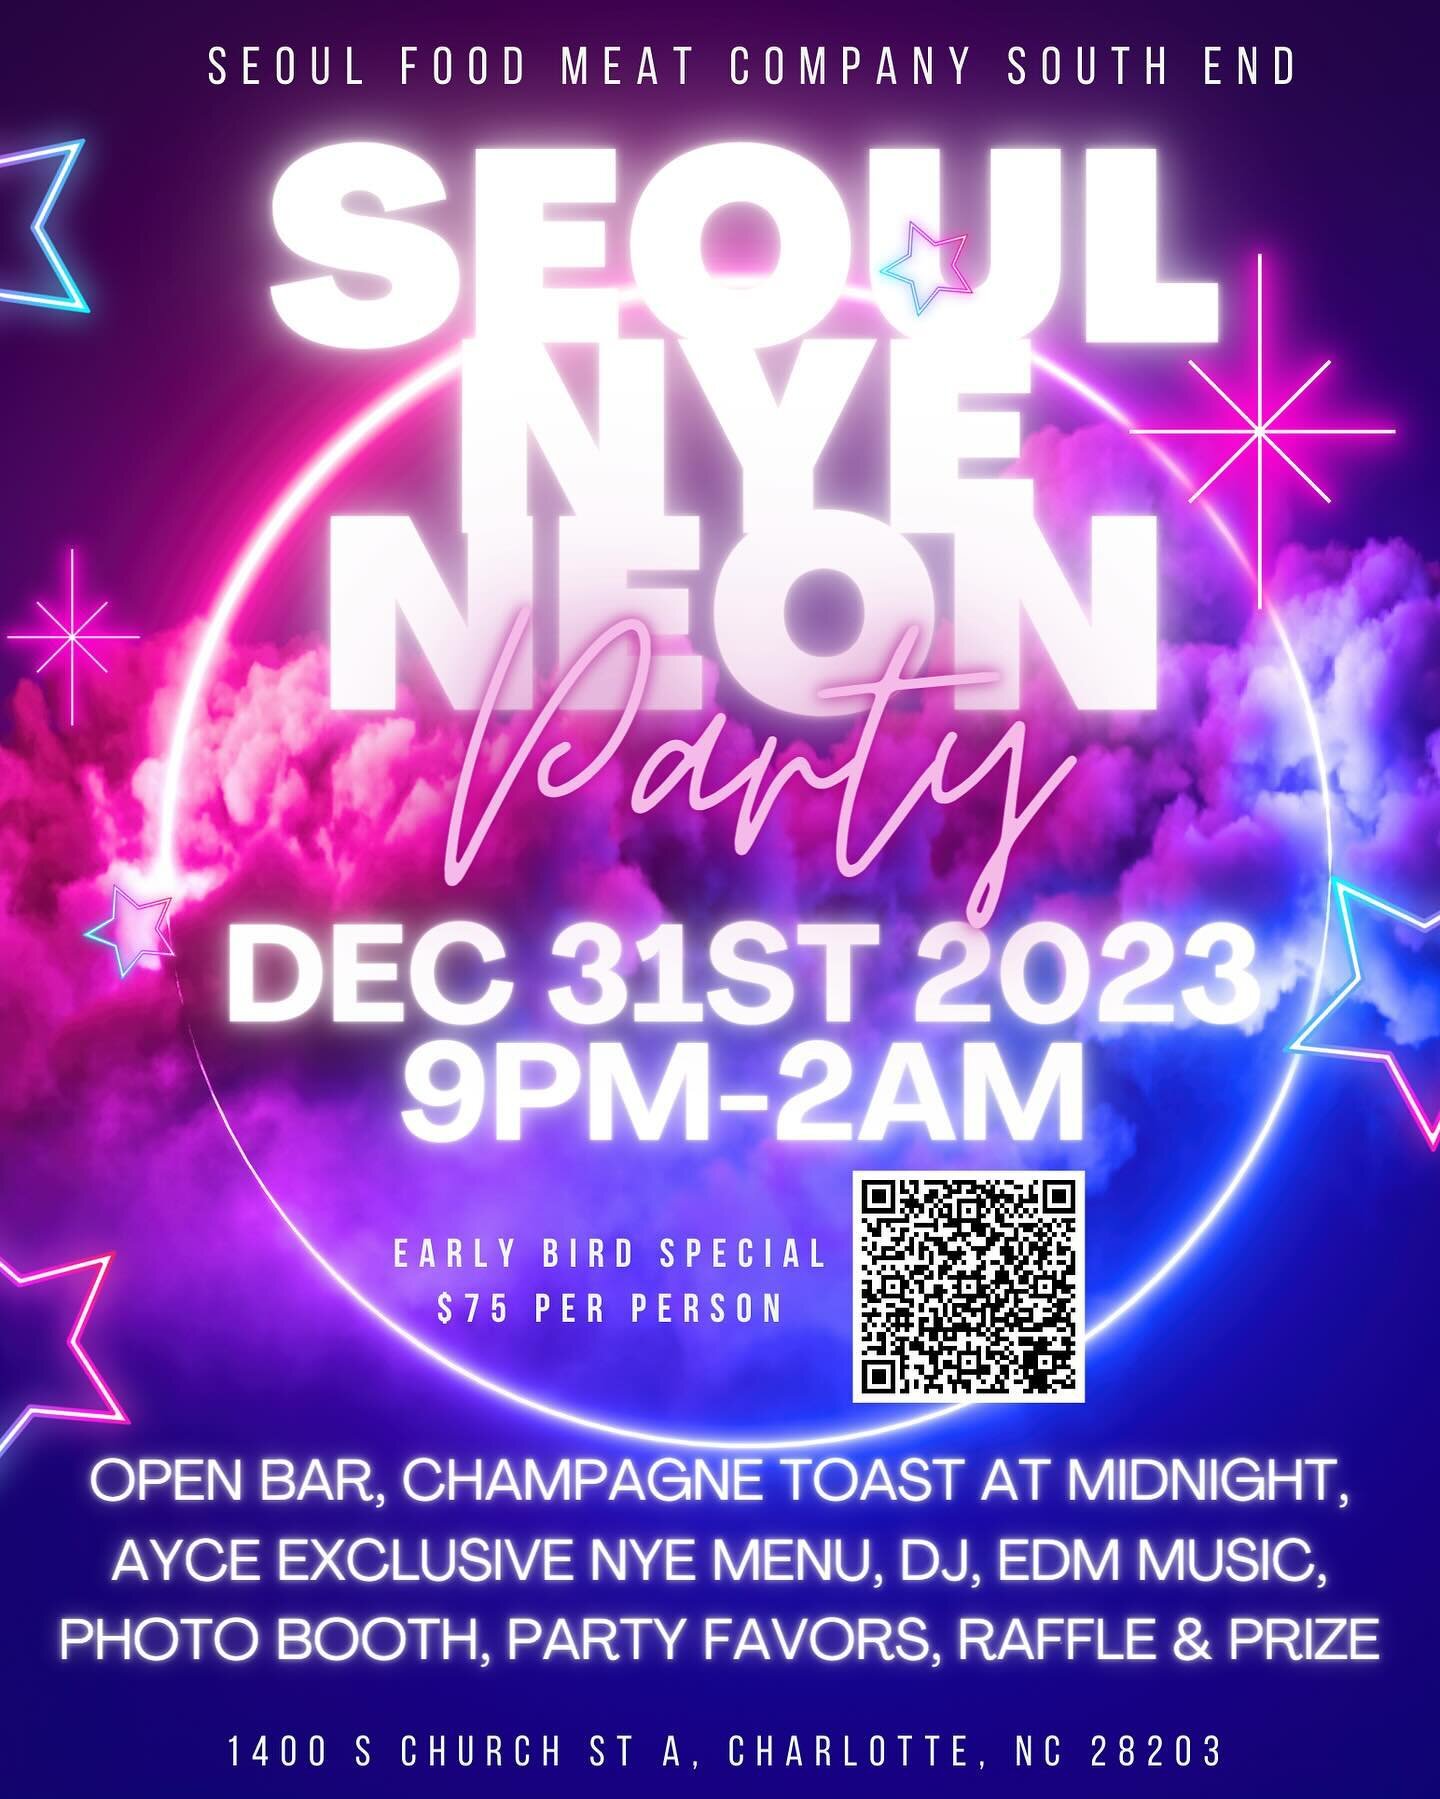 ⭐️ 🚨GIVEAWAY ALERT 🚨 ⭐️
Seoul Food South End is having an NYE party we want to party with our loyal customers so we are giving away two tickets each to THREE of our followers (6 tickets total). 

	1.	Must Follow @seoulfoodmeatco
	2.	Tag friends you